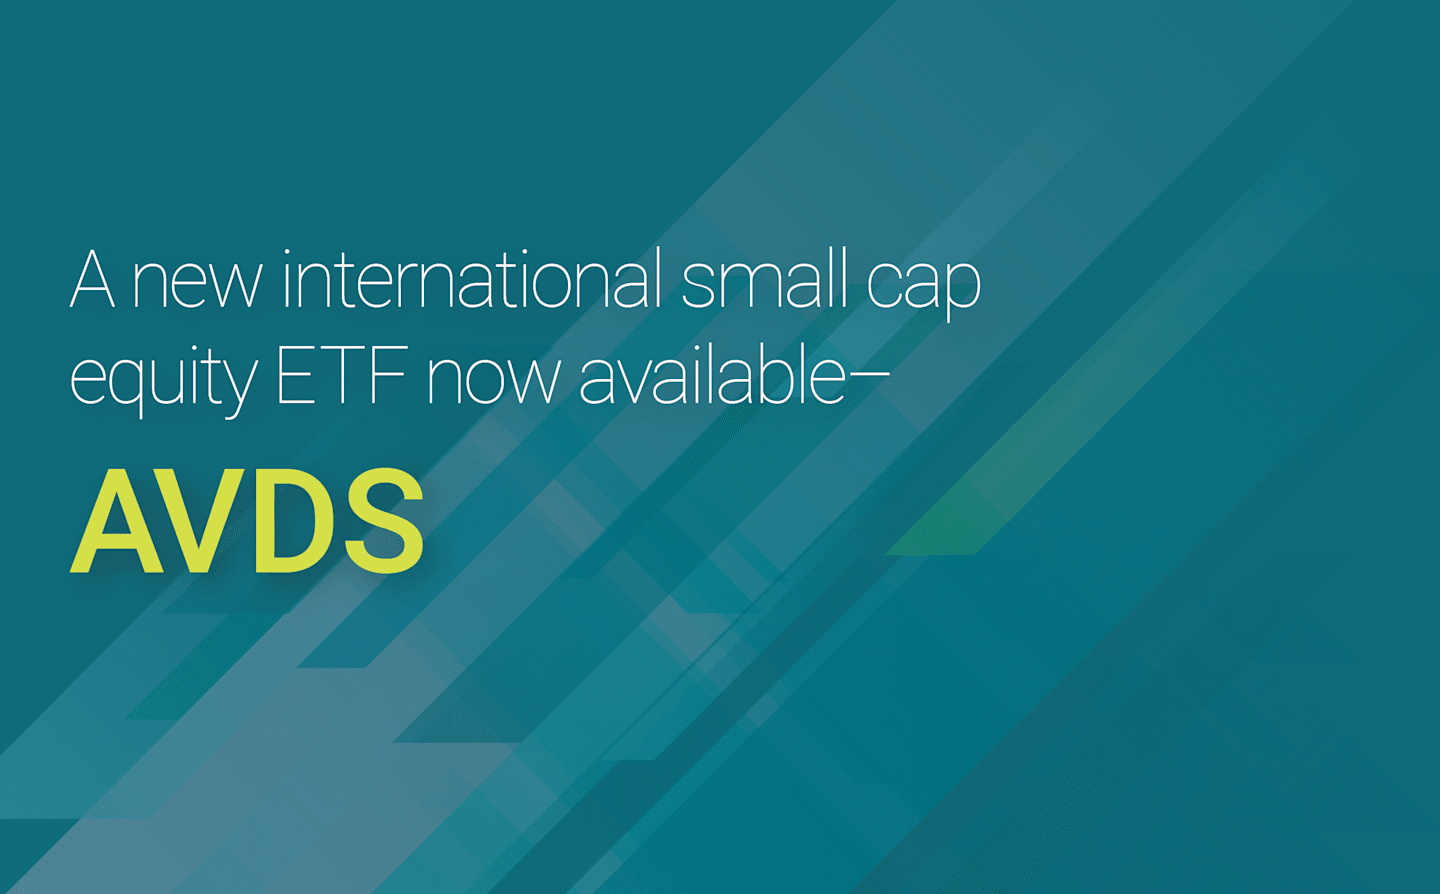 Image with the following text: A new international small cap equity ETF now available - AVDS